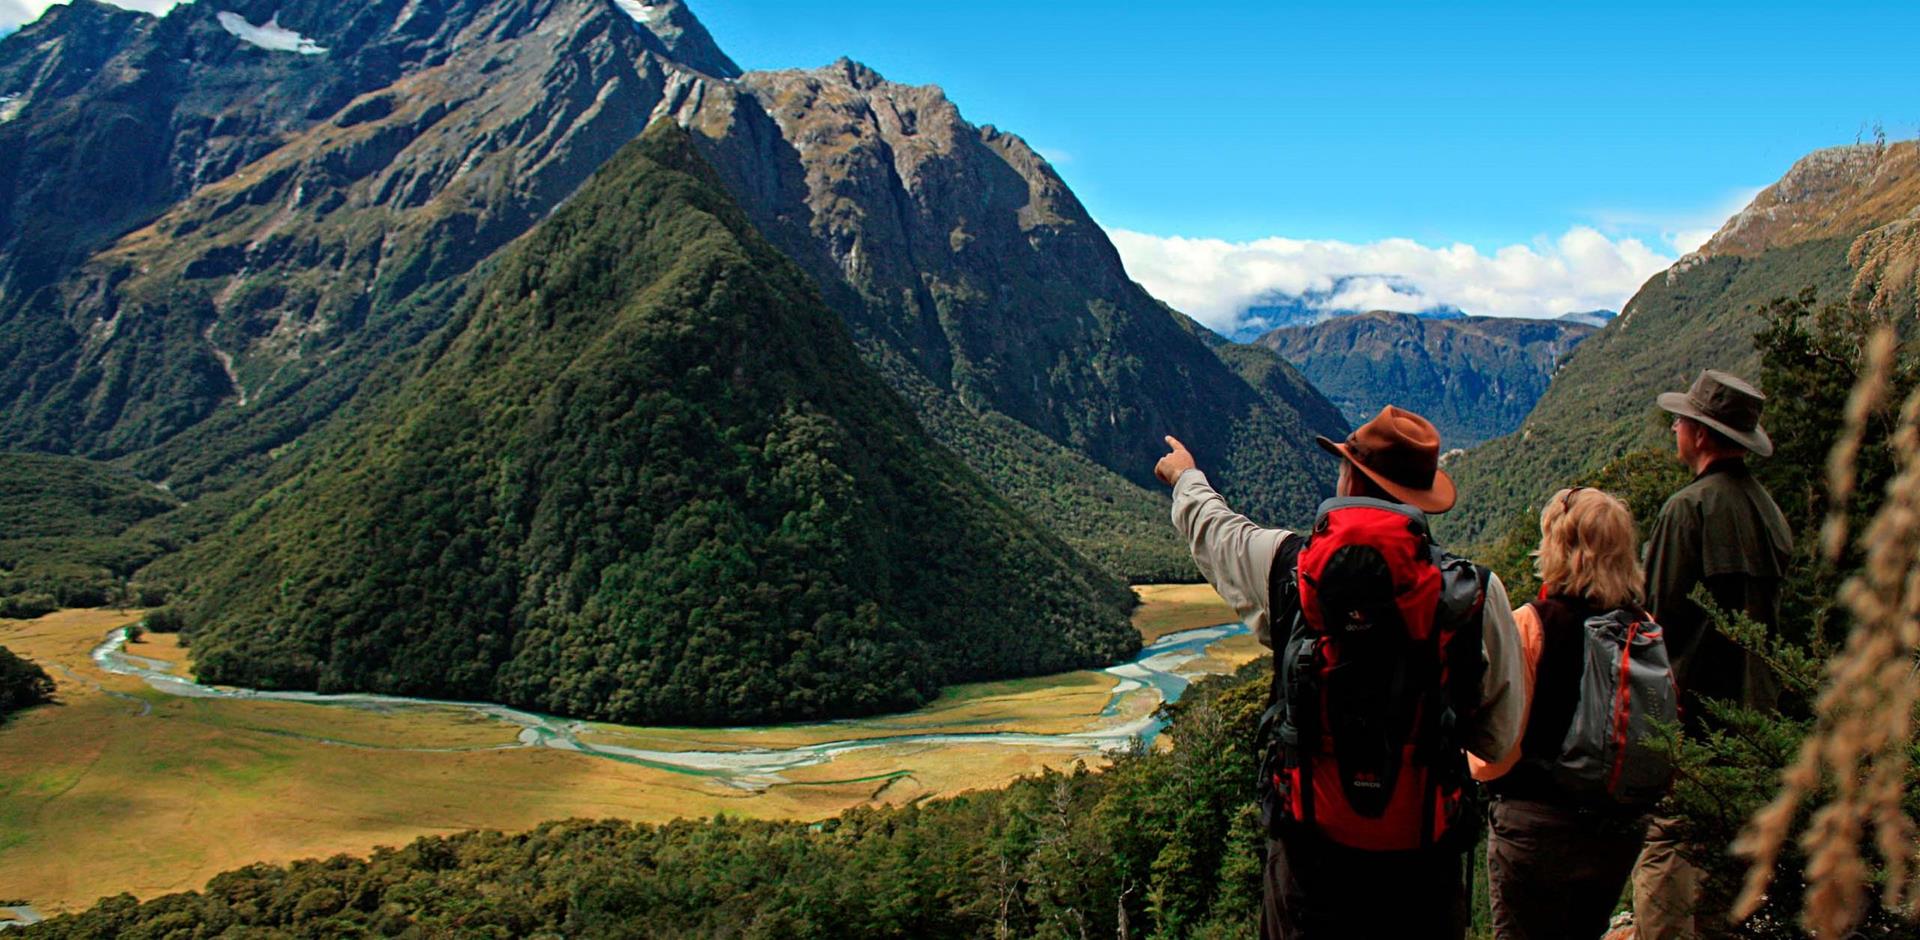 A&K New Zealand experience: Guided walk of the Routeburn Track